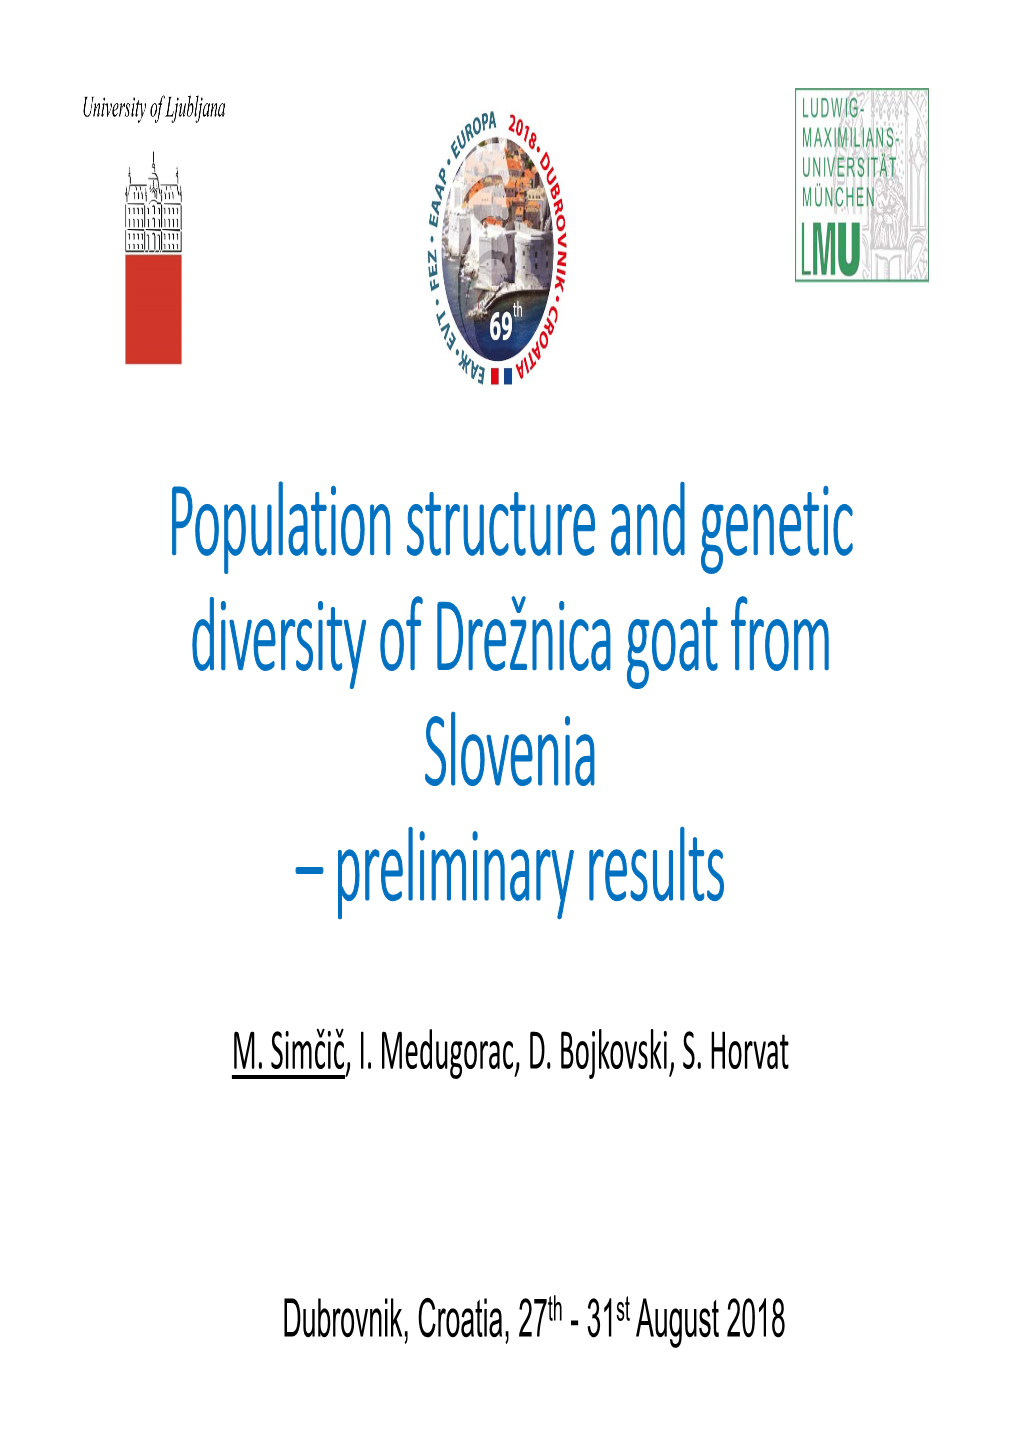 Population Structure and Genetic Diversity of Drežnica Goat from Slovenia –Preliminary Results